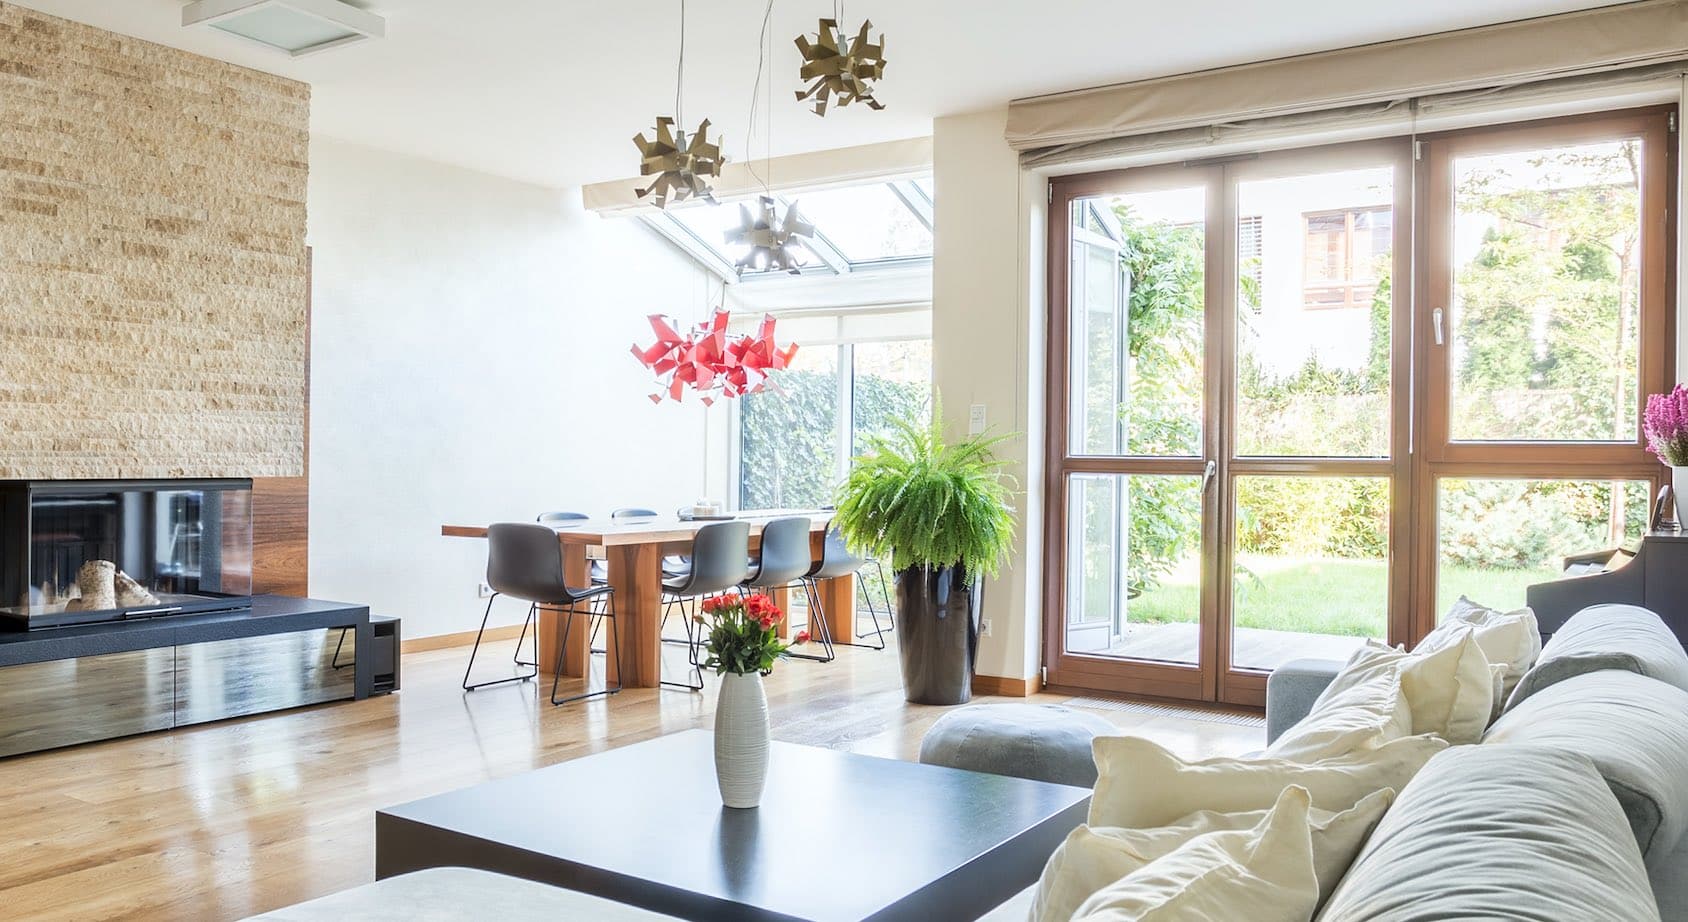 Like Home Improvement Projects? Window Film Offers Great Benefits